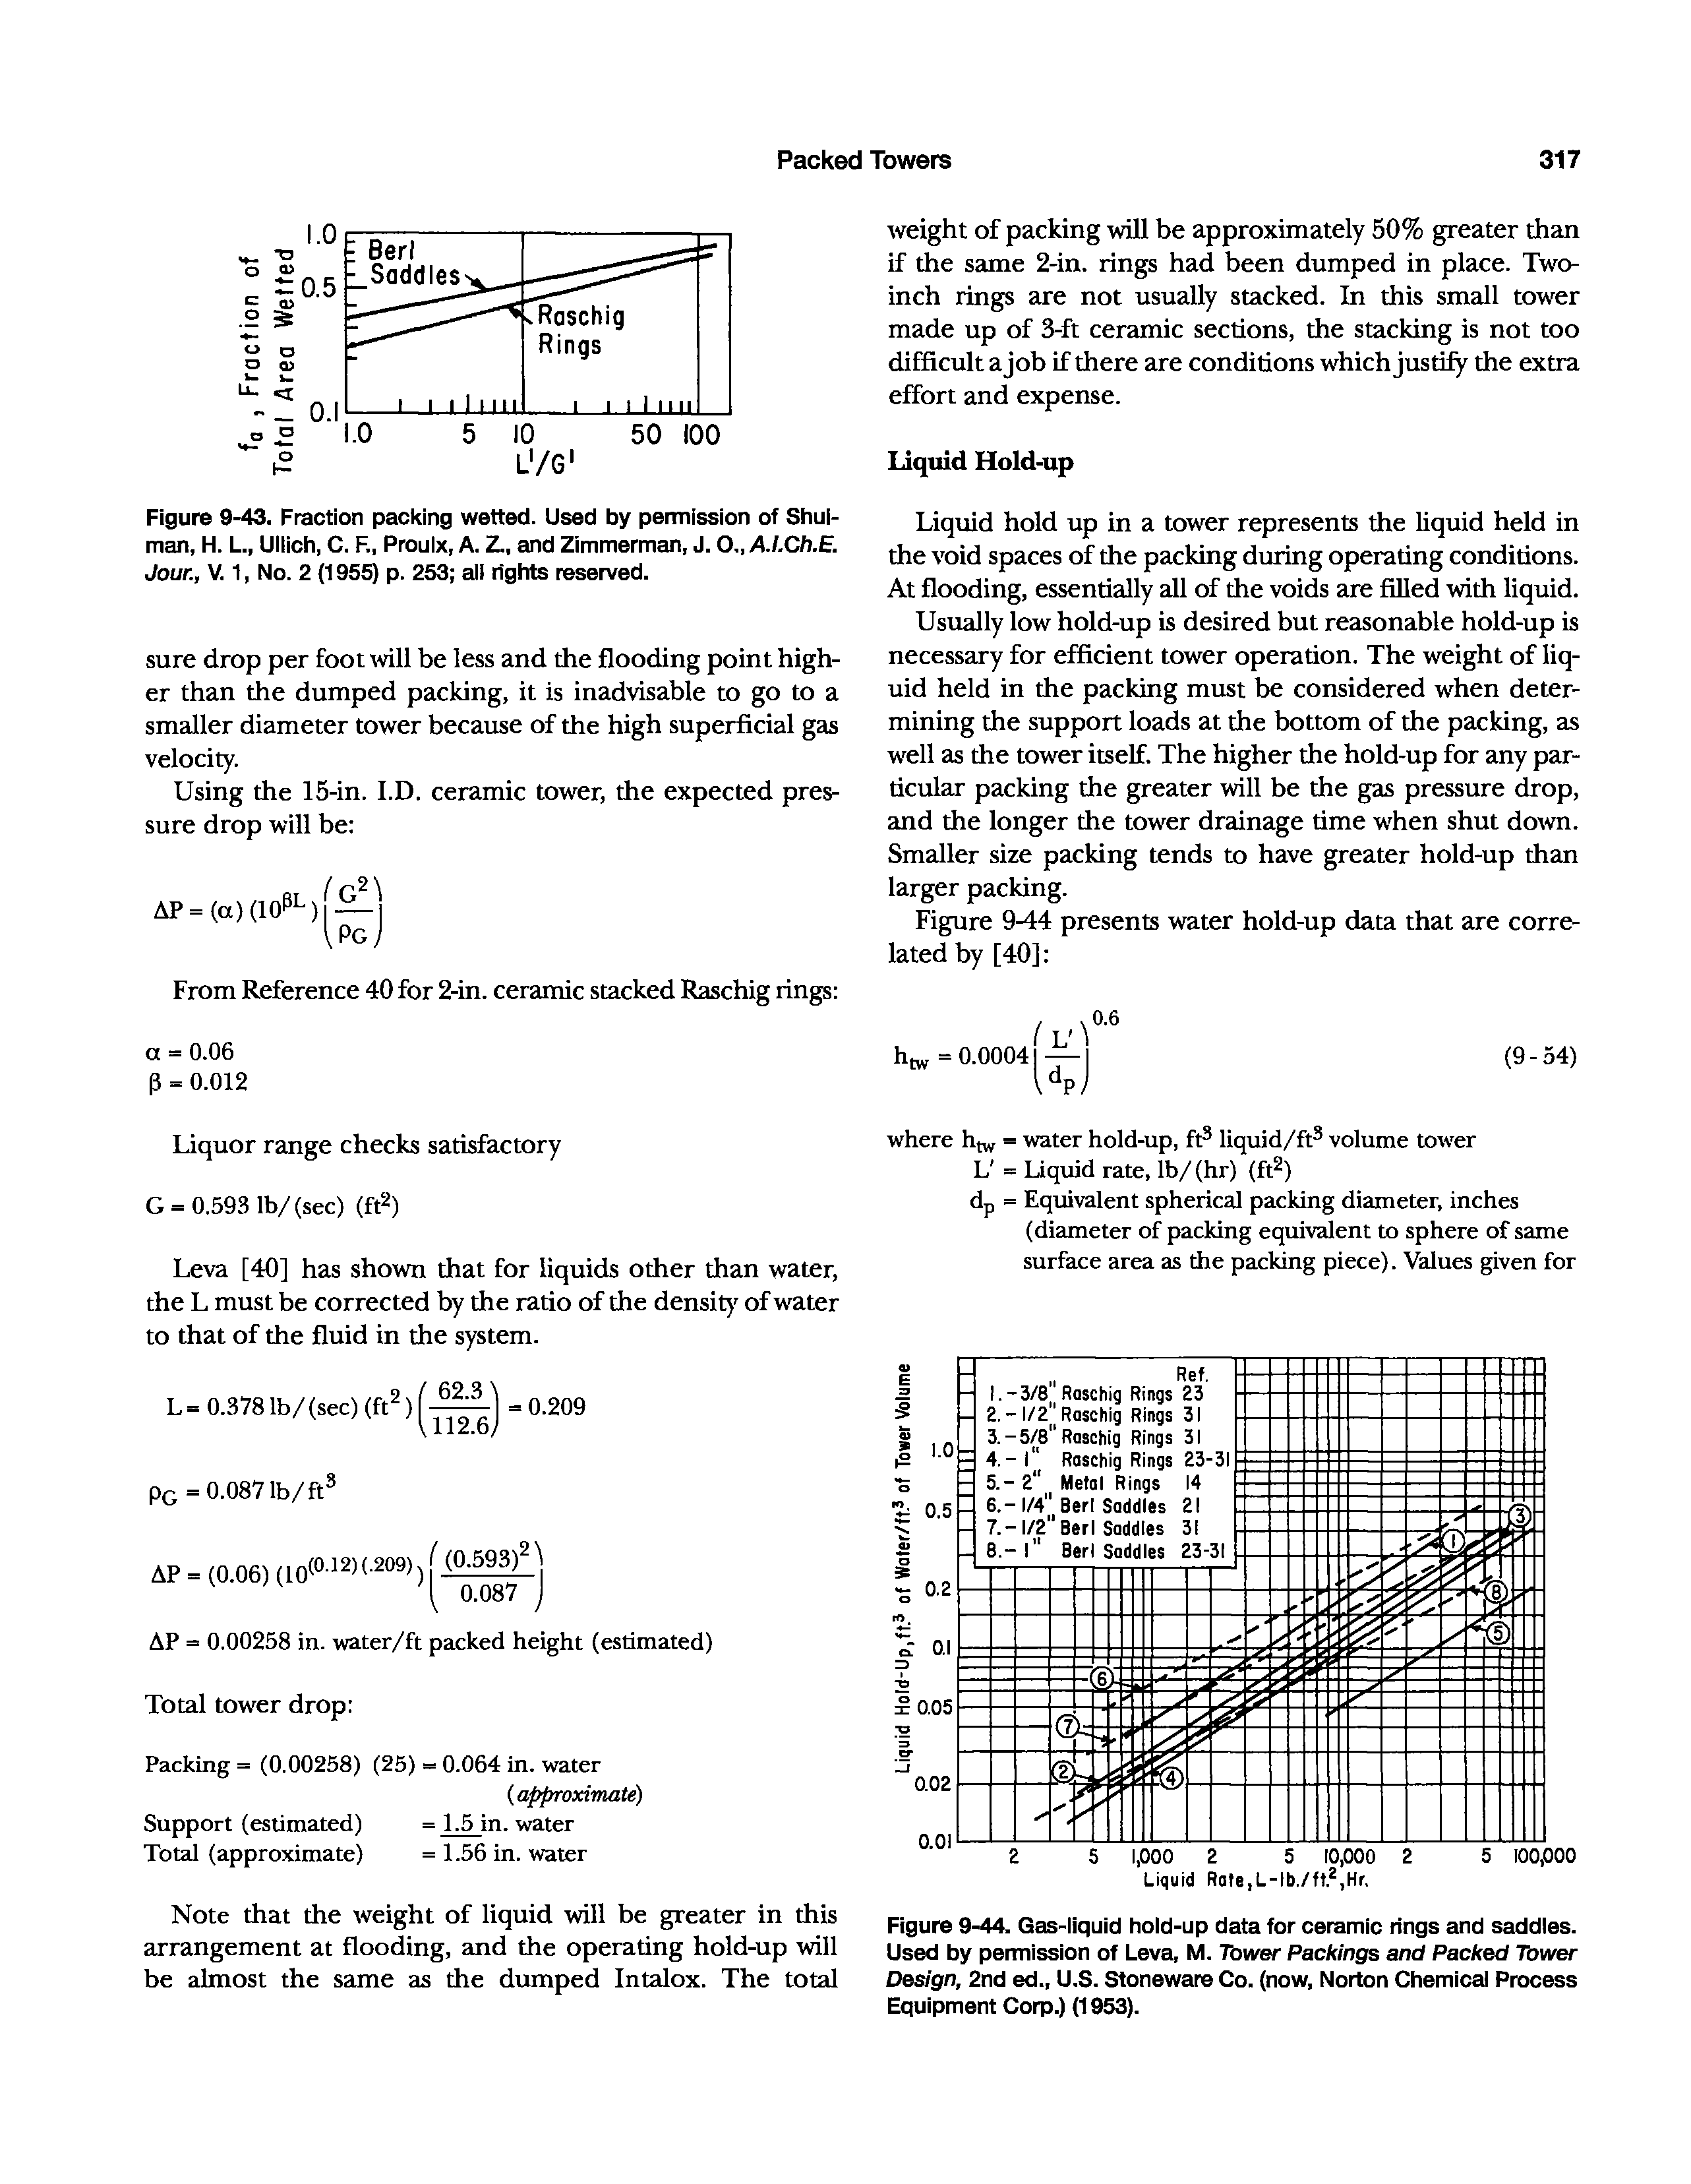 Figure 9-43. Fraction packing wetted. Used by permission of Shul-man, H. L., Uiiich, C. F., Prouix, A. Z., etnd Zimmerman, J. O., A.I.Ch.E. Jour., V. 1, No. 2 (1955) p. 253 ail rights reserved.